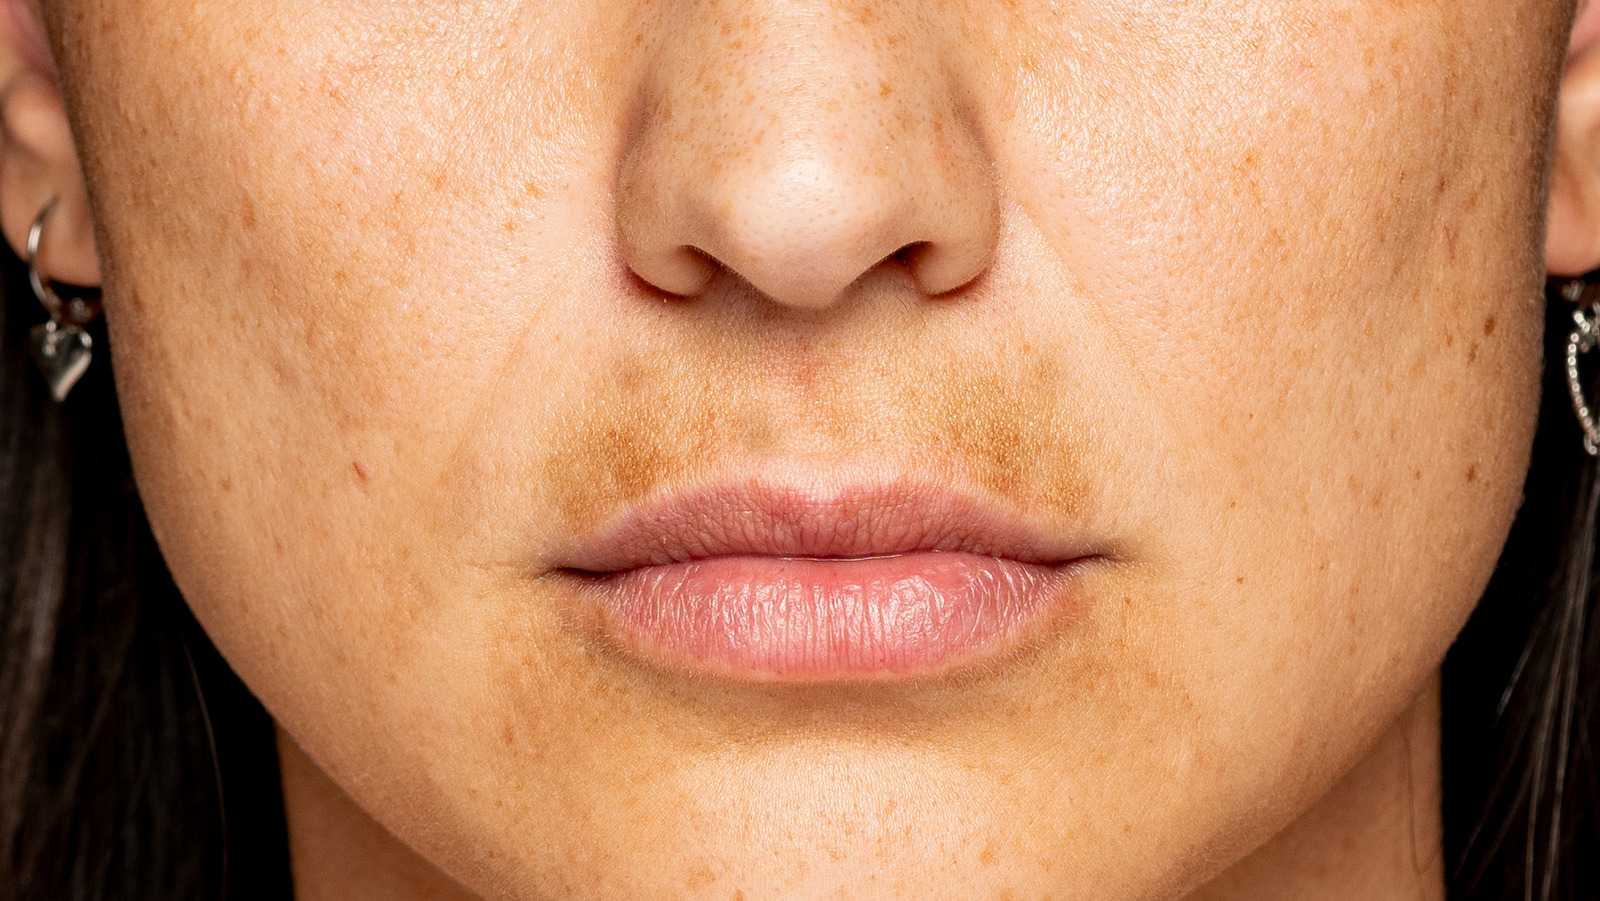 Treatments To Try To Clear Up Skin Discoloration